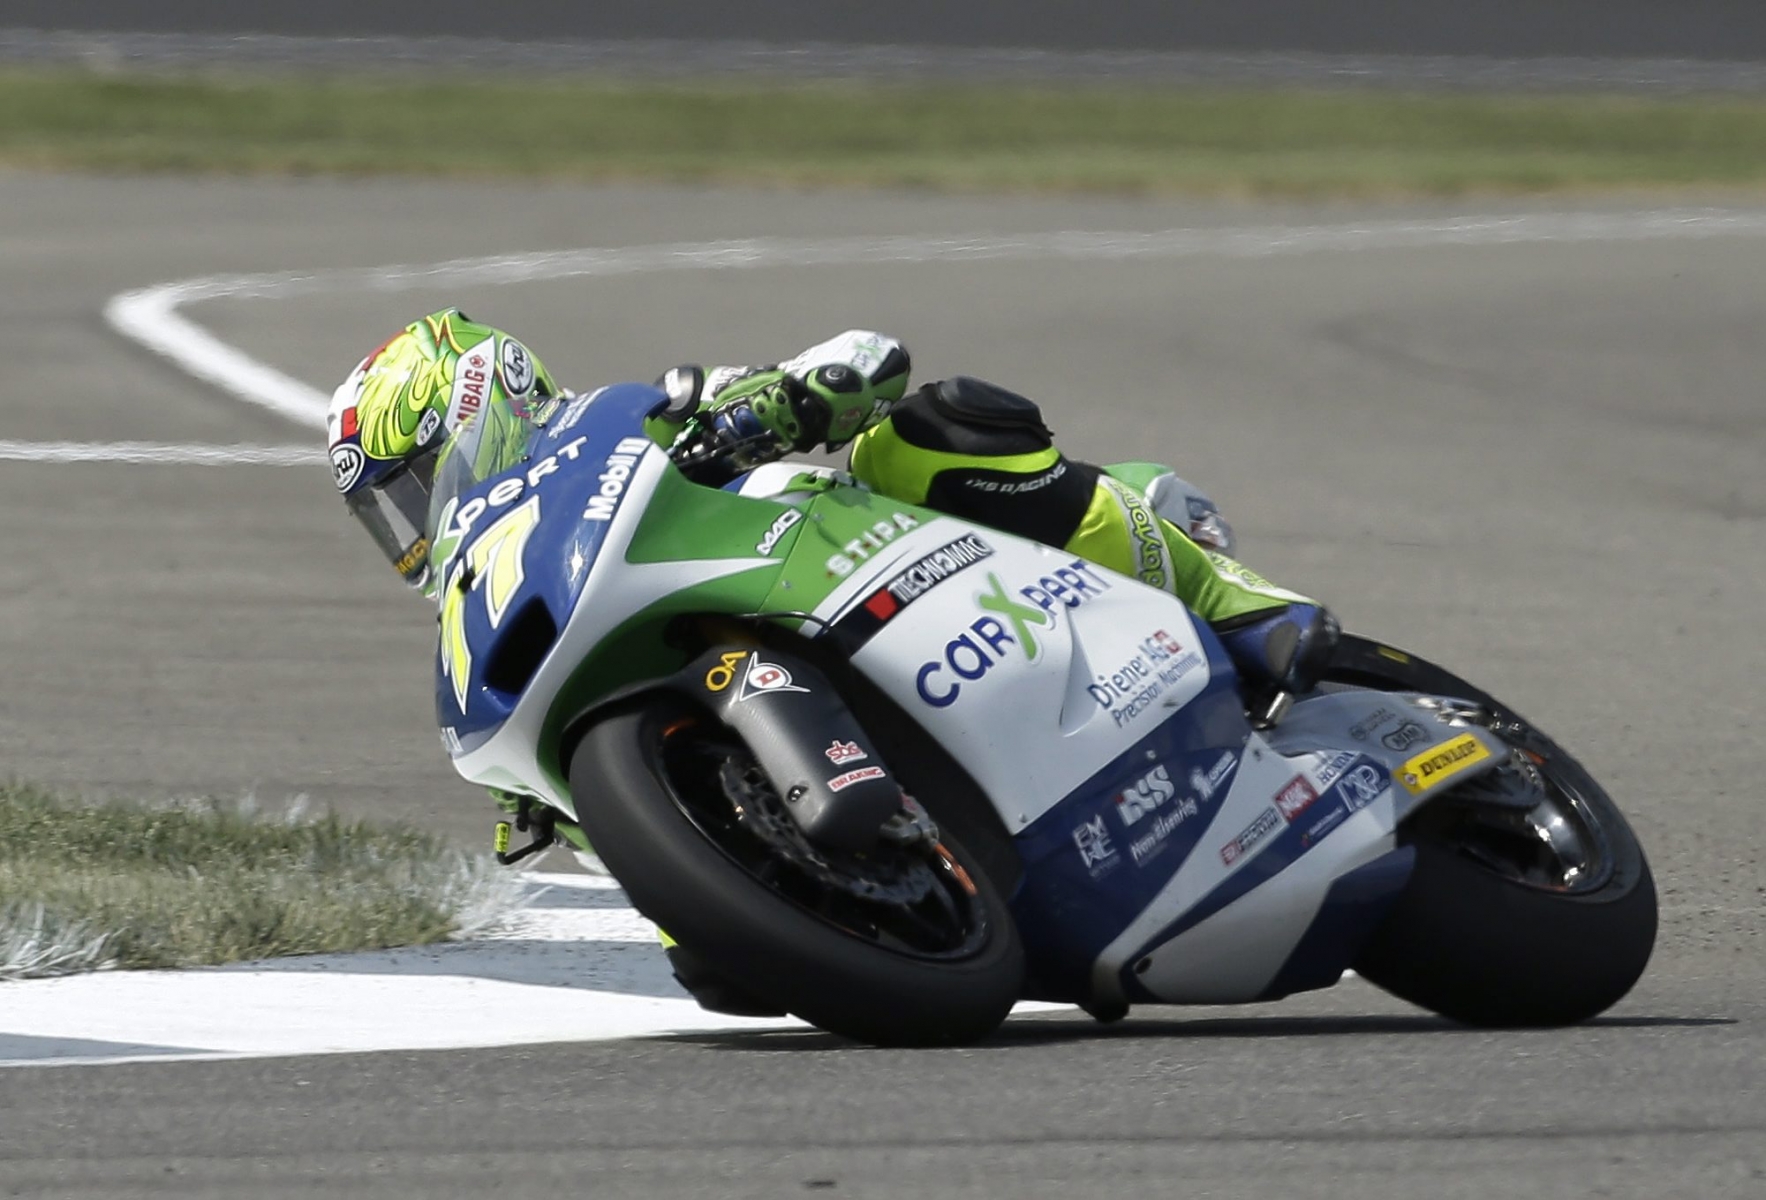 Dominique Aegerter, of Switzerland, rides during the Indianapolis Grand Prix Moto2 motorcycle race at the Indianapolis Motor Speedway Sunday, Aug. 18, 2013, in Indianapolis. (AP Photo/Darron Cummings) 